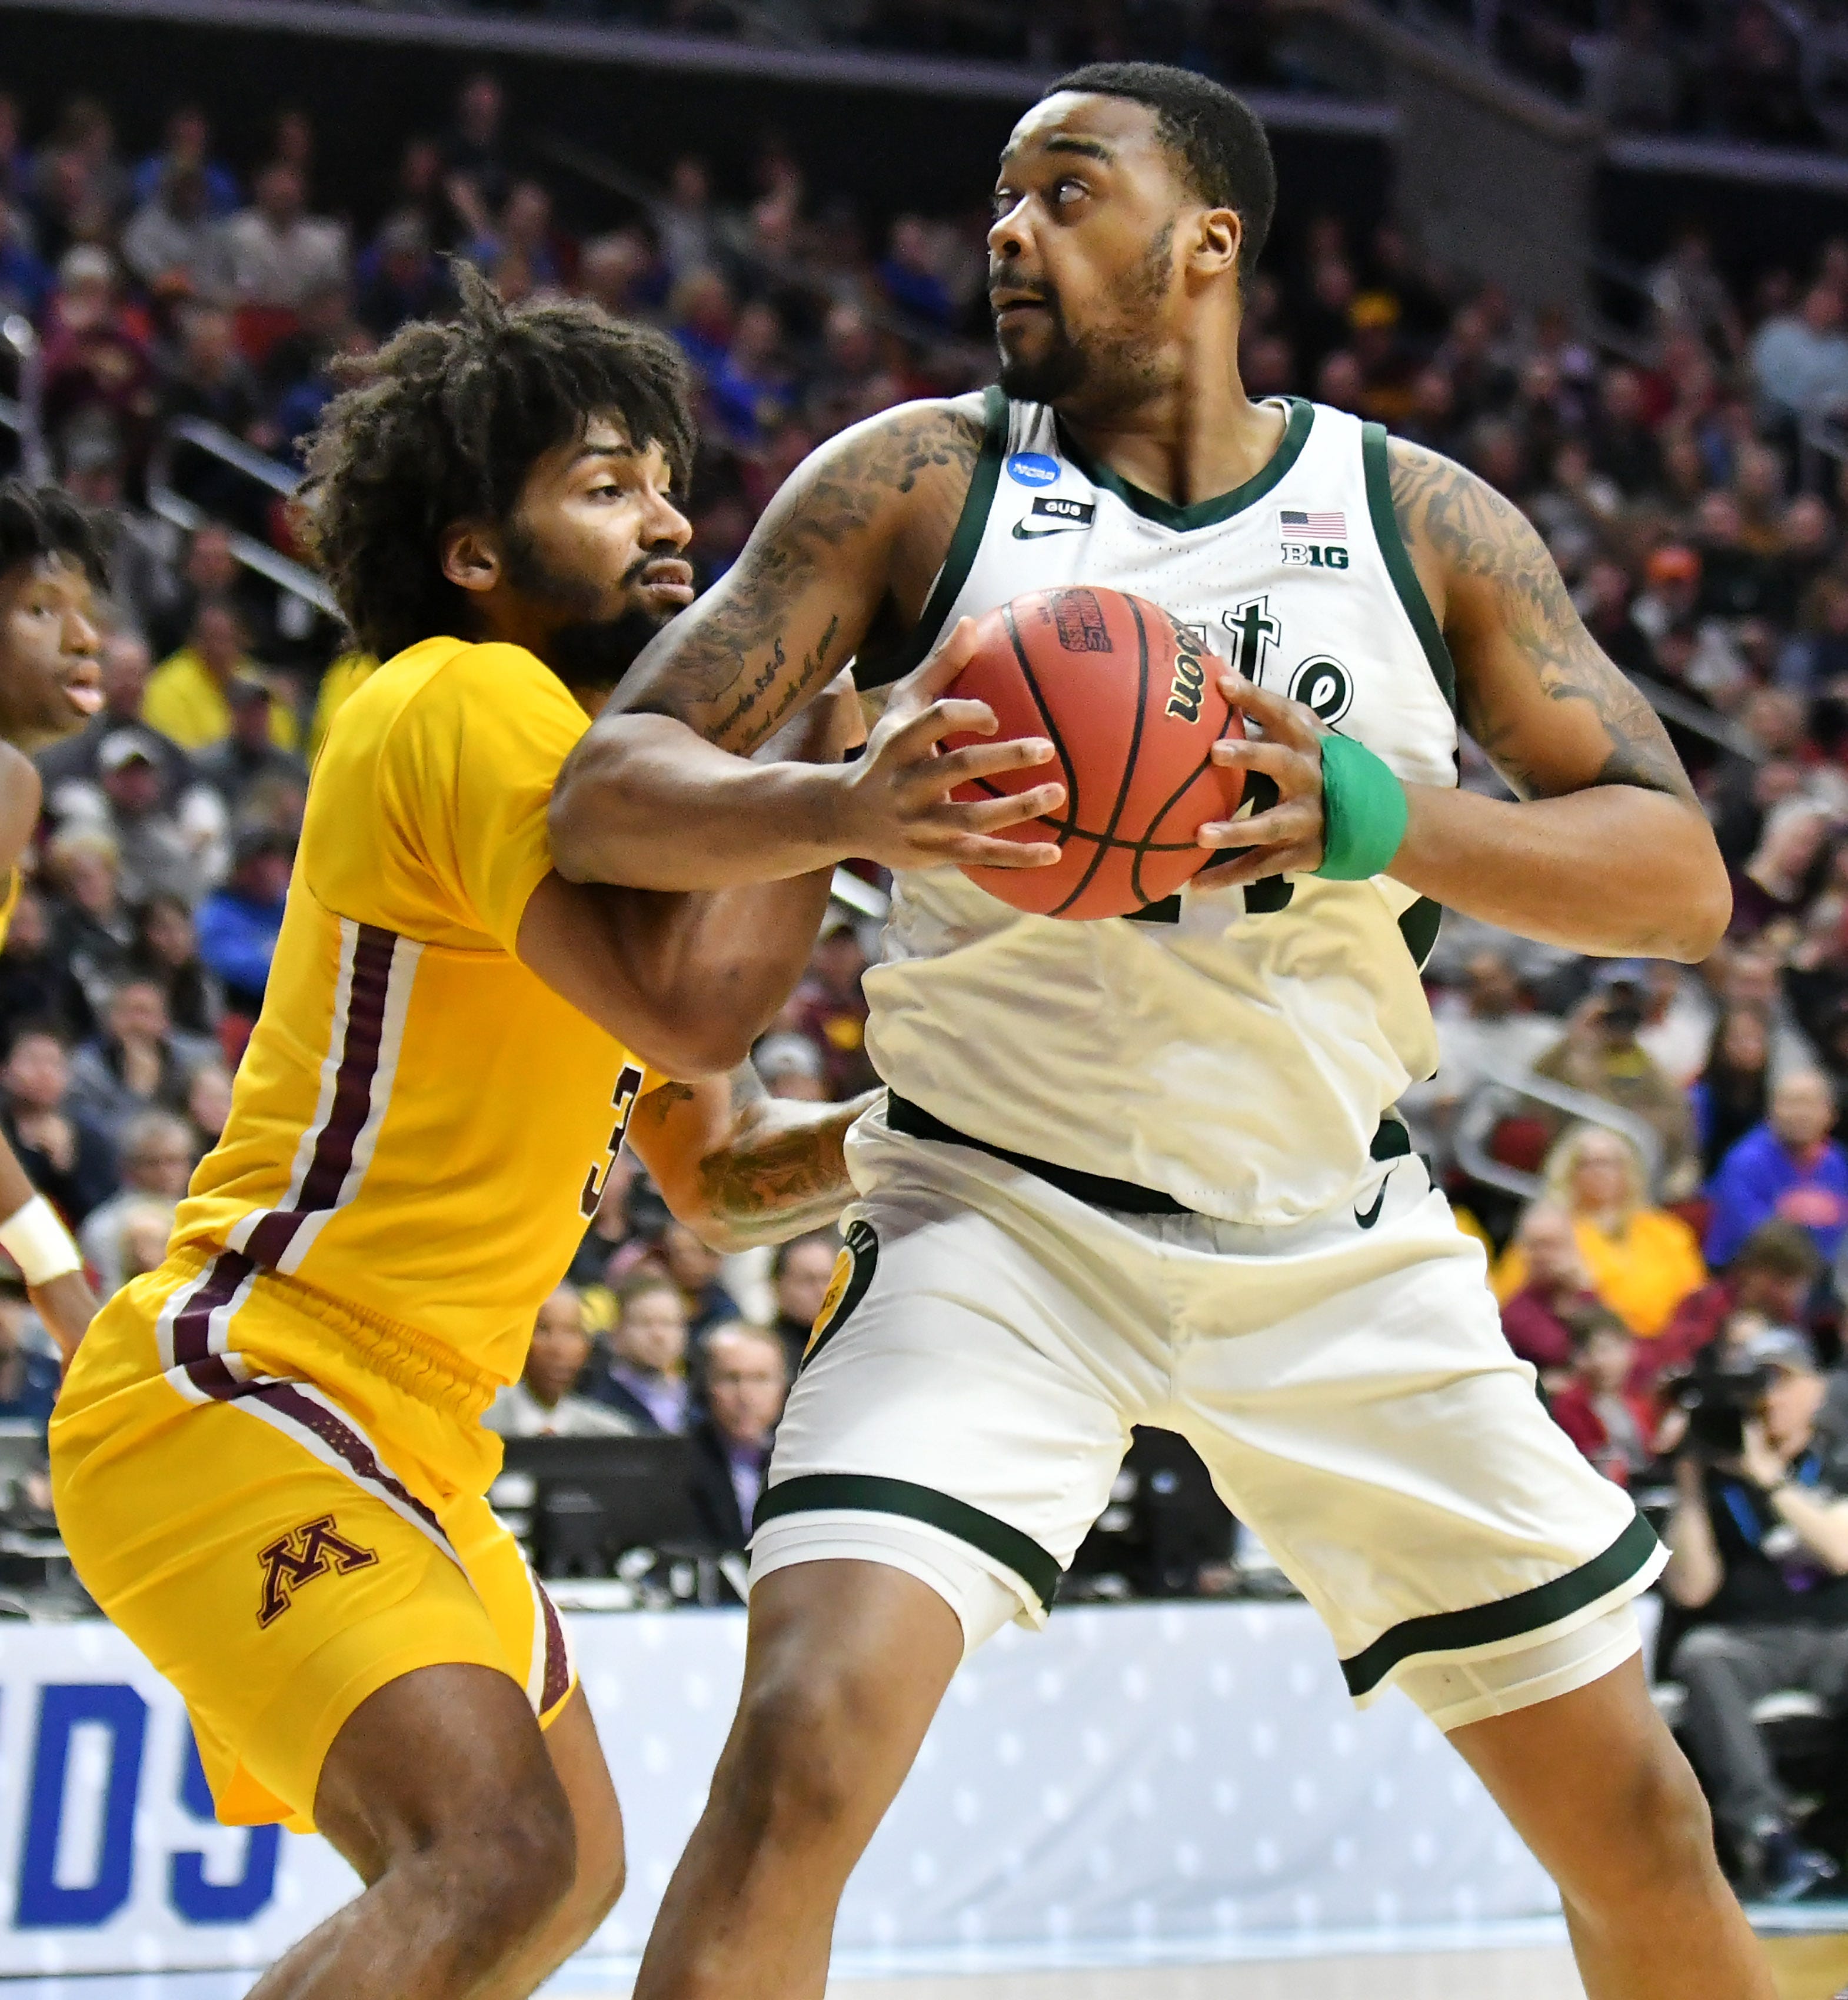 Center Nick Ward (44) is entering the NBA draft, and will not return to Michigan State.